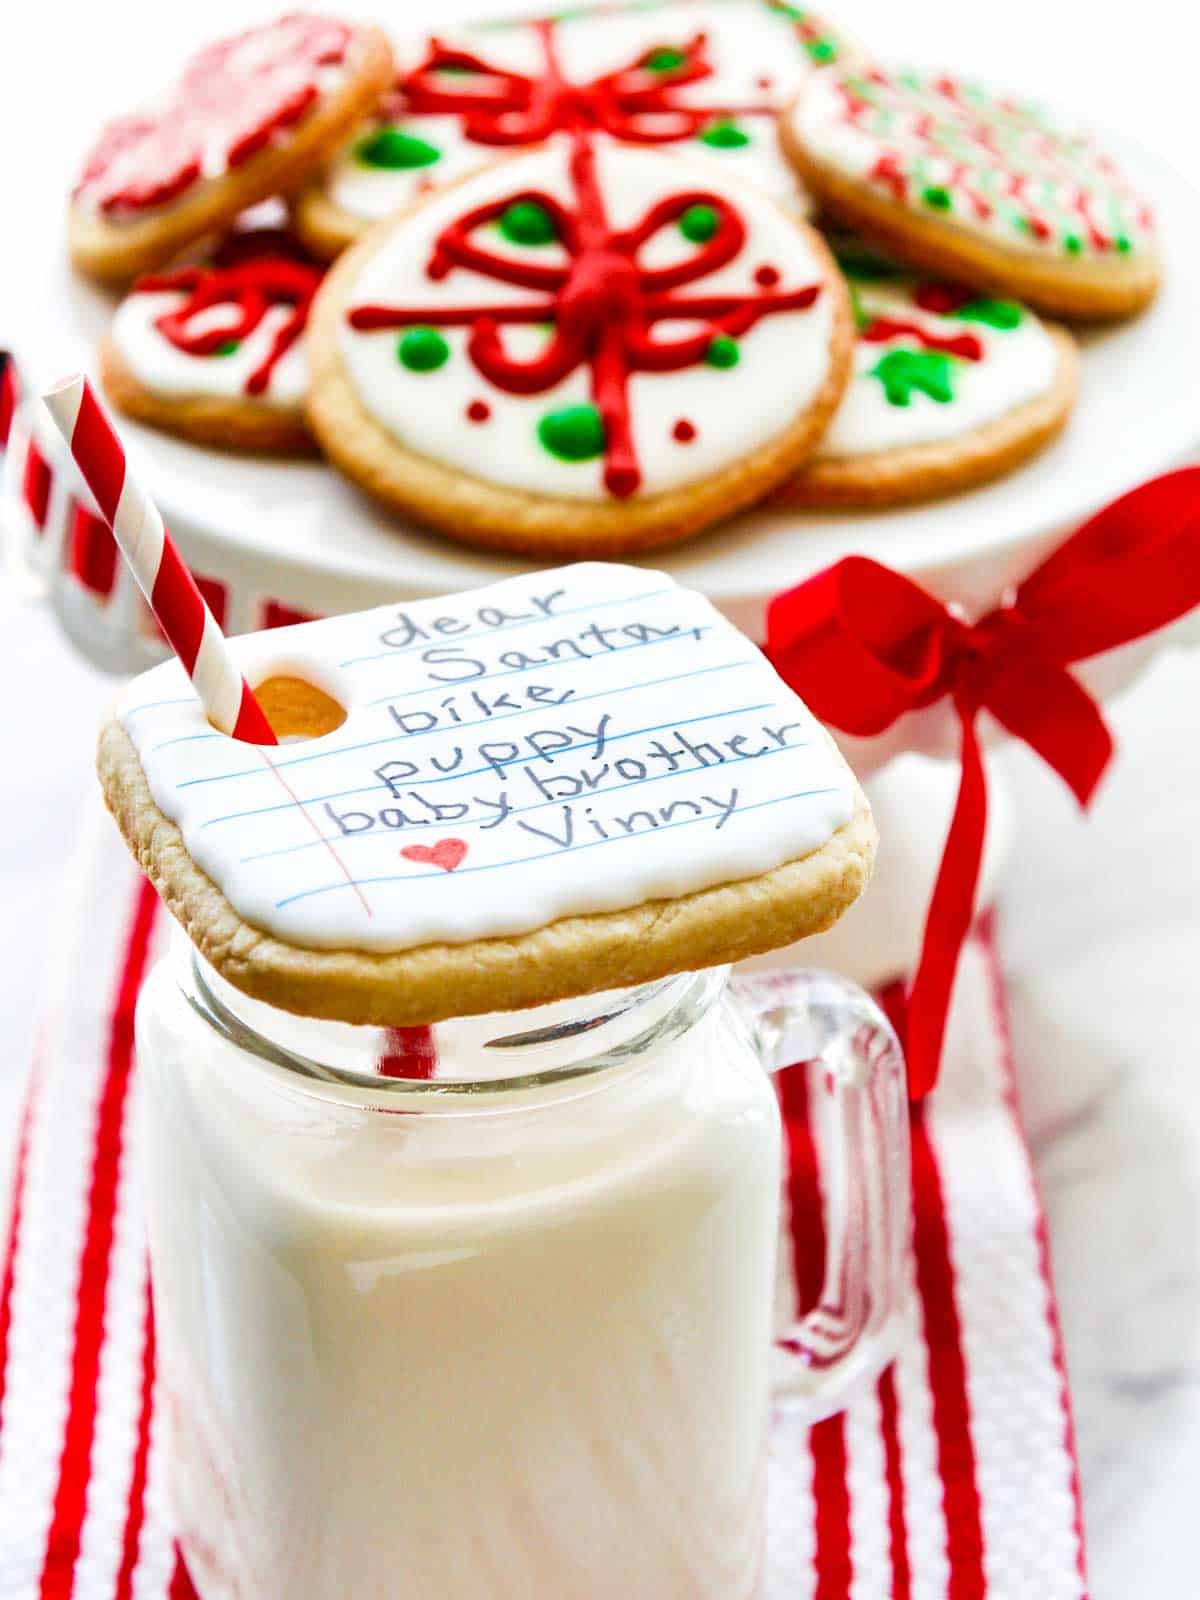 https://www.delicioustable.com/wp-content/uploads/2021/11/Santas-Cookies-with-a-wish-list.jpg